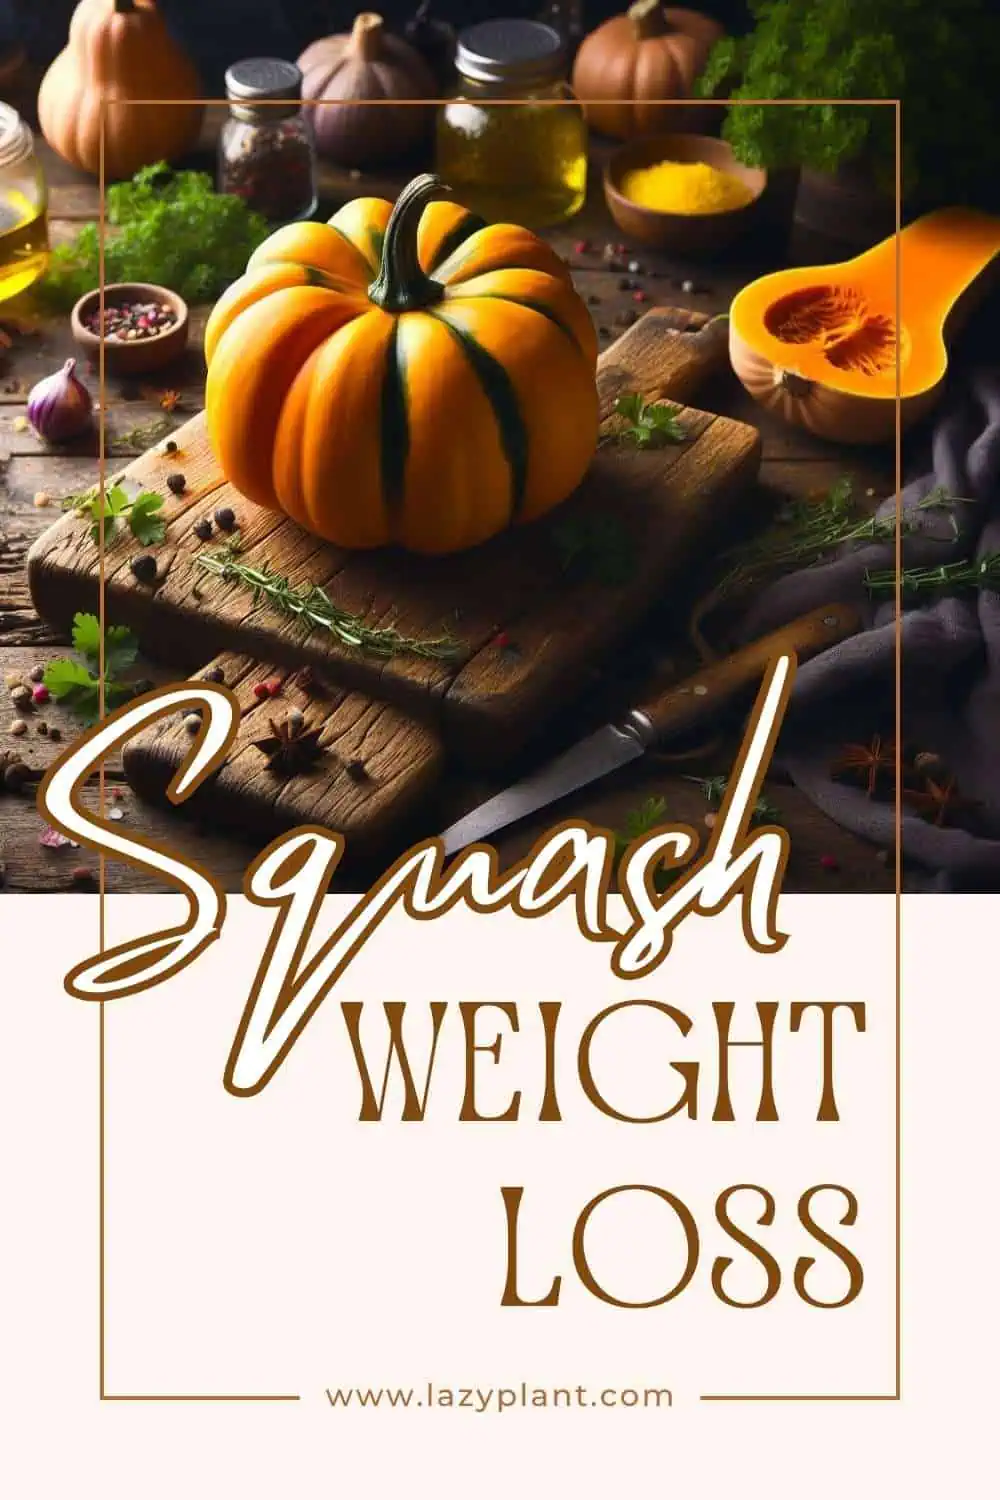 Squash supports Weight Loss